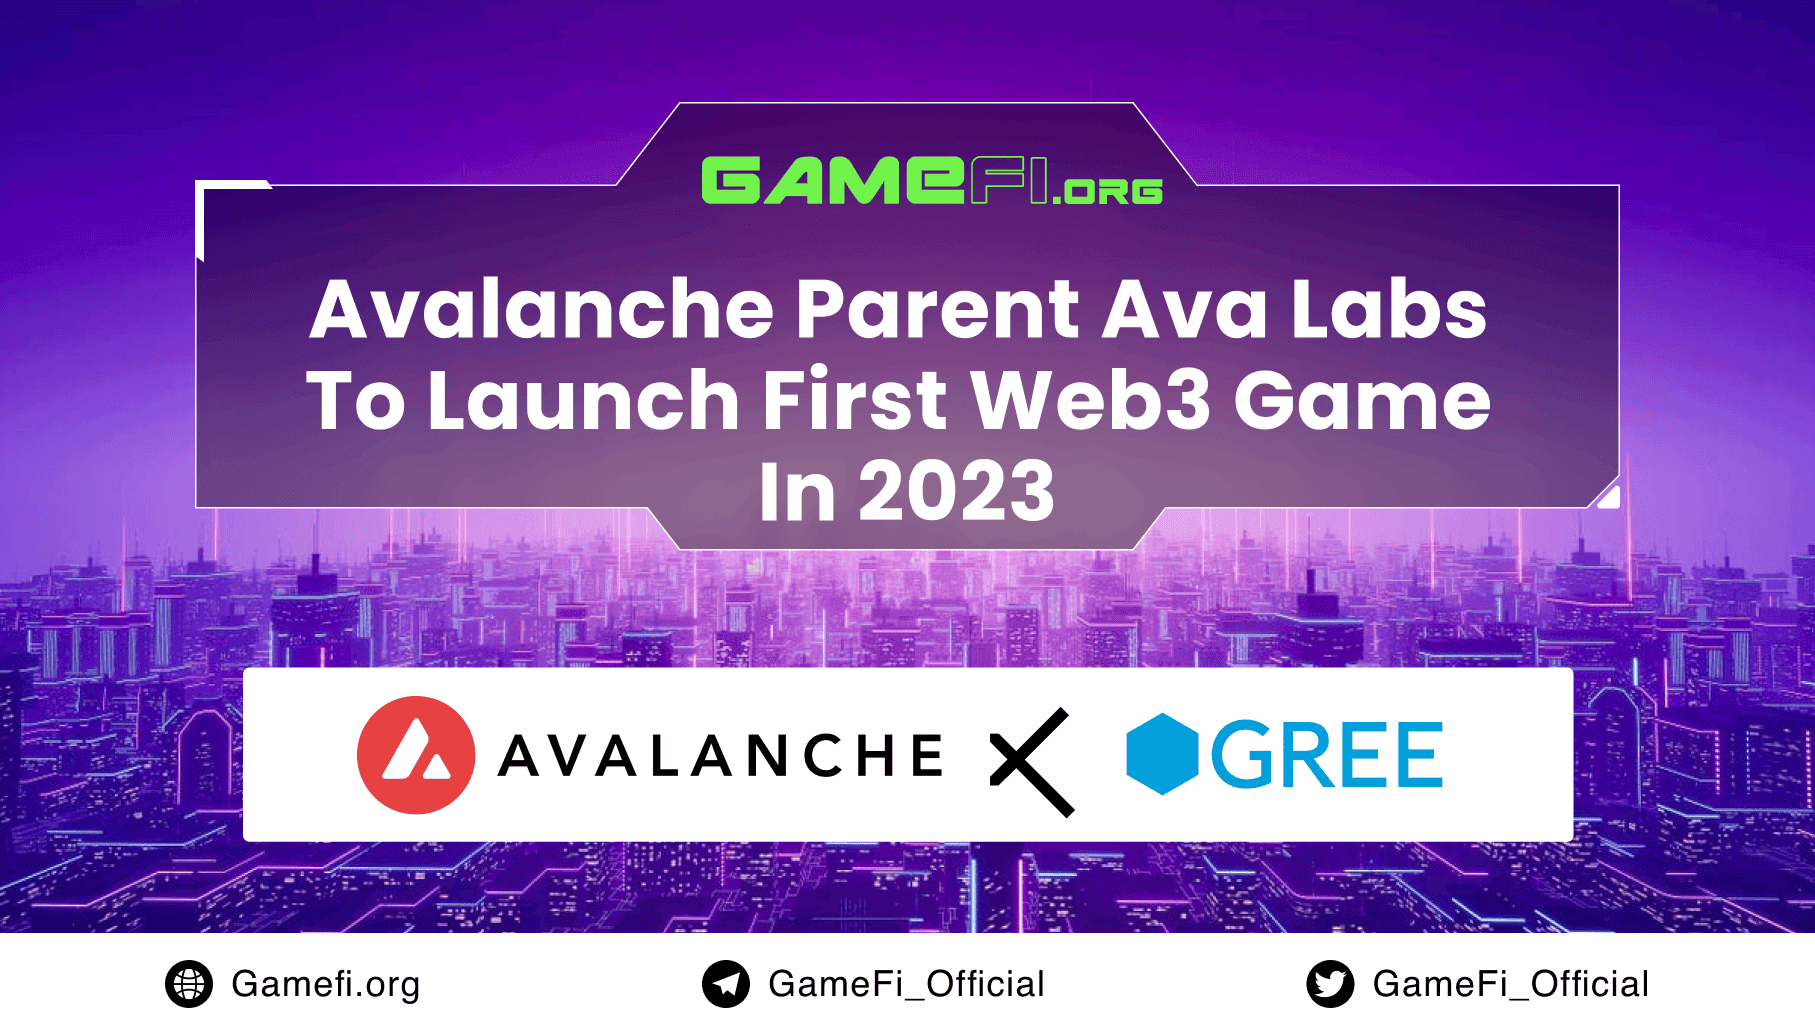 Avalanche Parent Ava Labs To Launch First Web3 Game In 2023